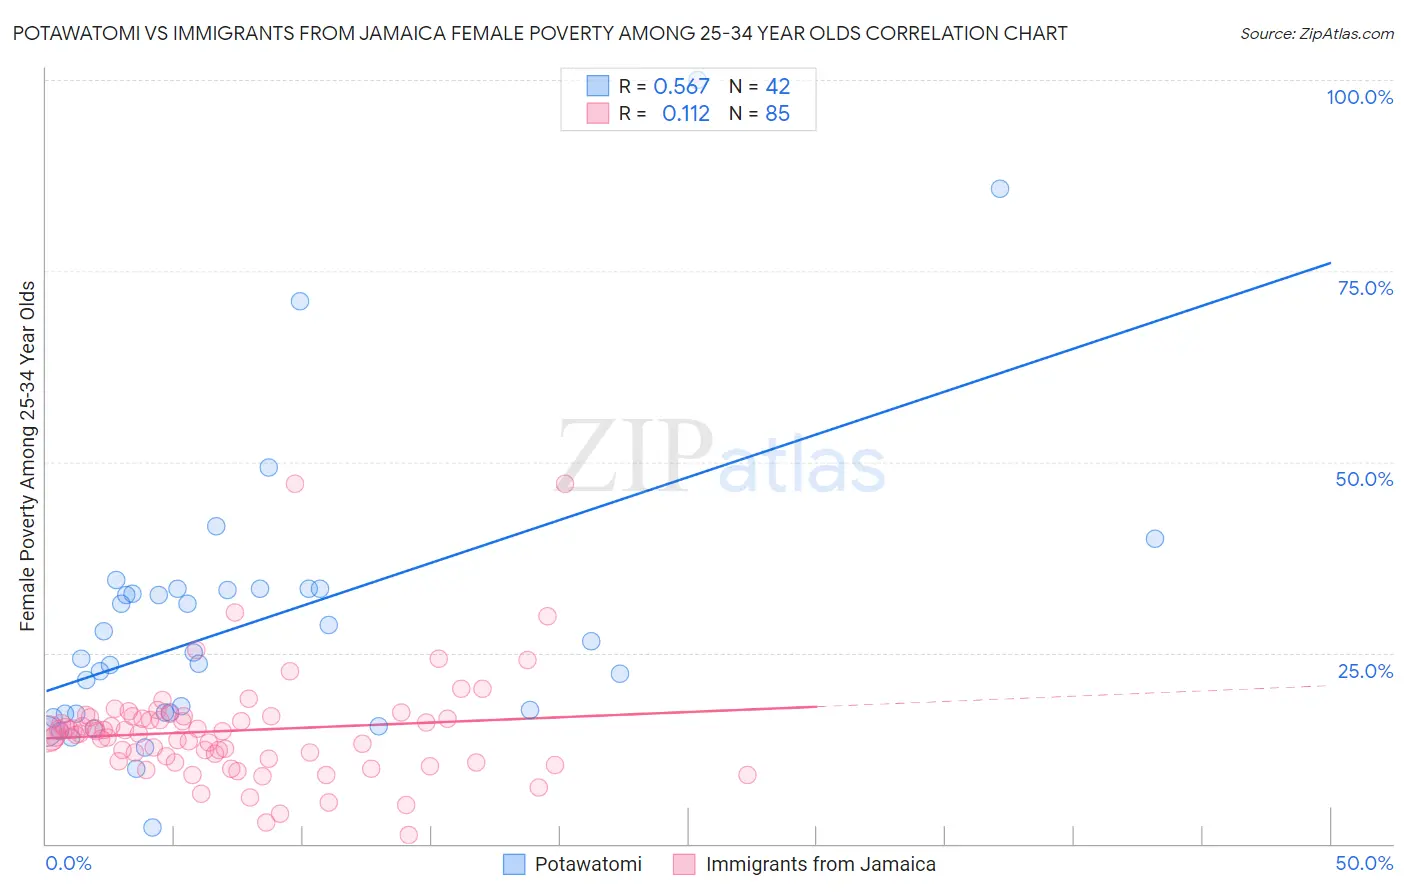 Potawatomi vs Immigrants from Jamaica Female Poverty Among 25-34 Year Olds